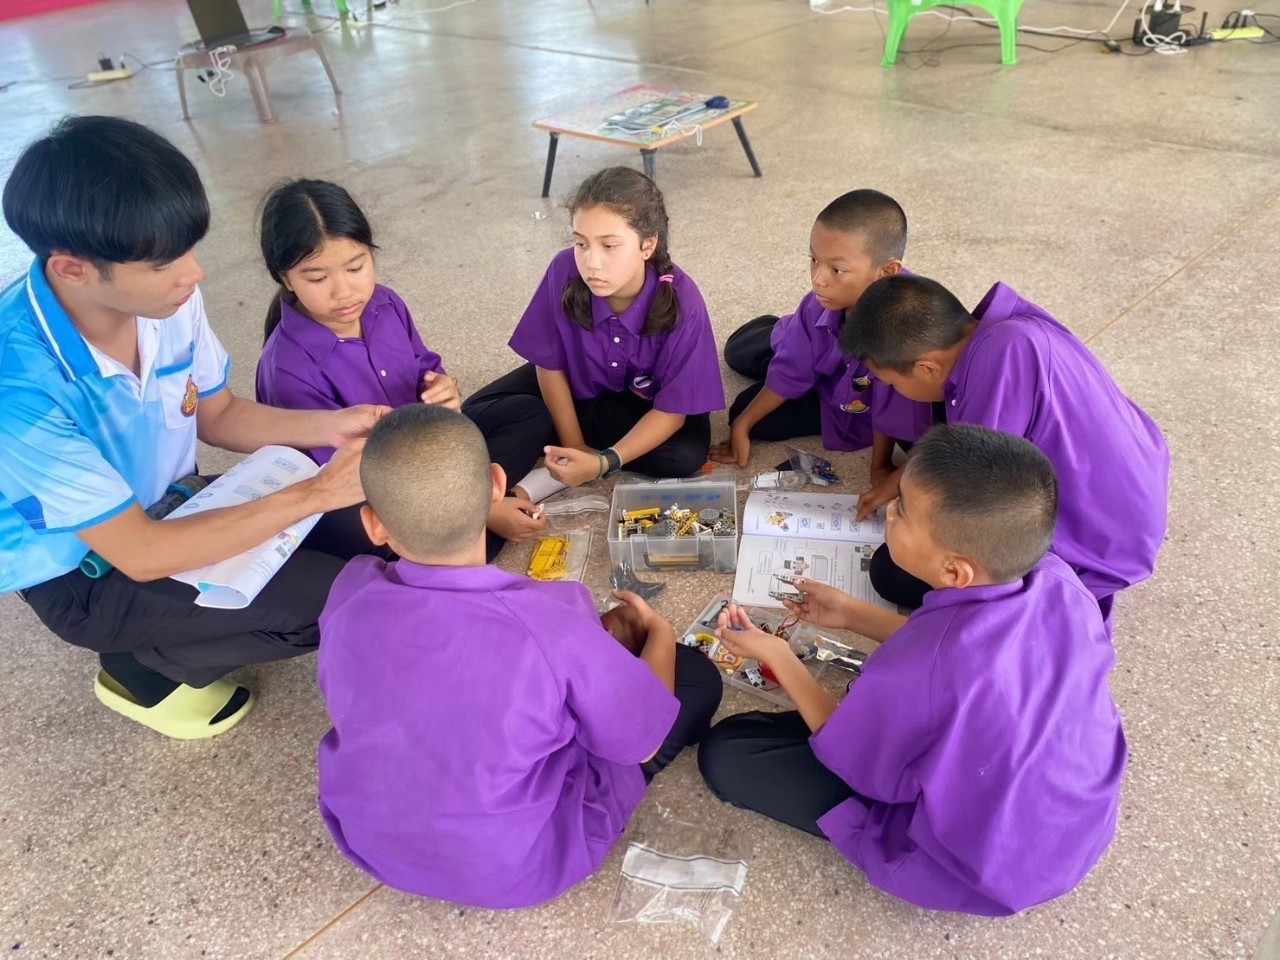 Ban Tha Luang School in the CONNEXT ED project adopts a learn-play approach with a focus on developing thinking processes through "STEM CODING."